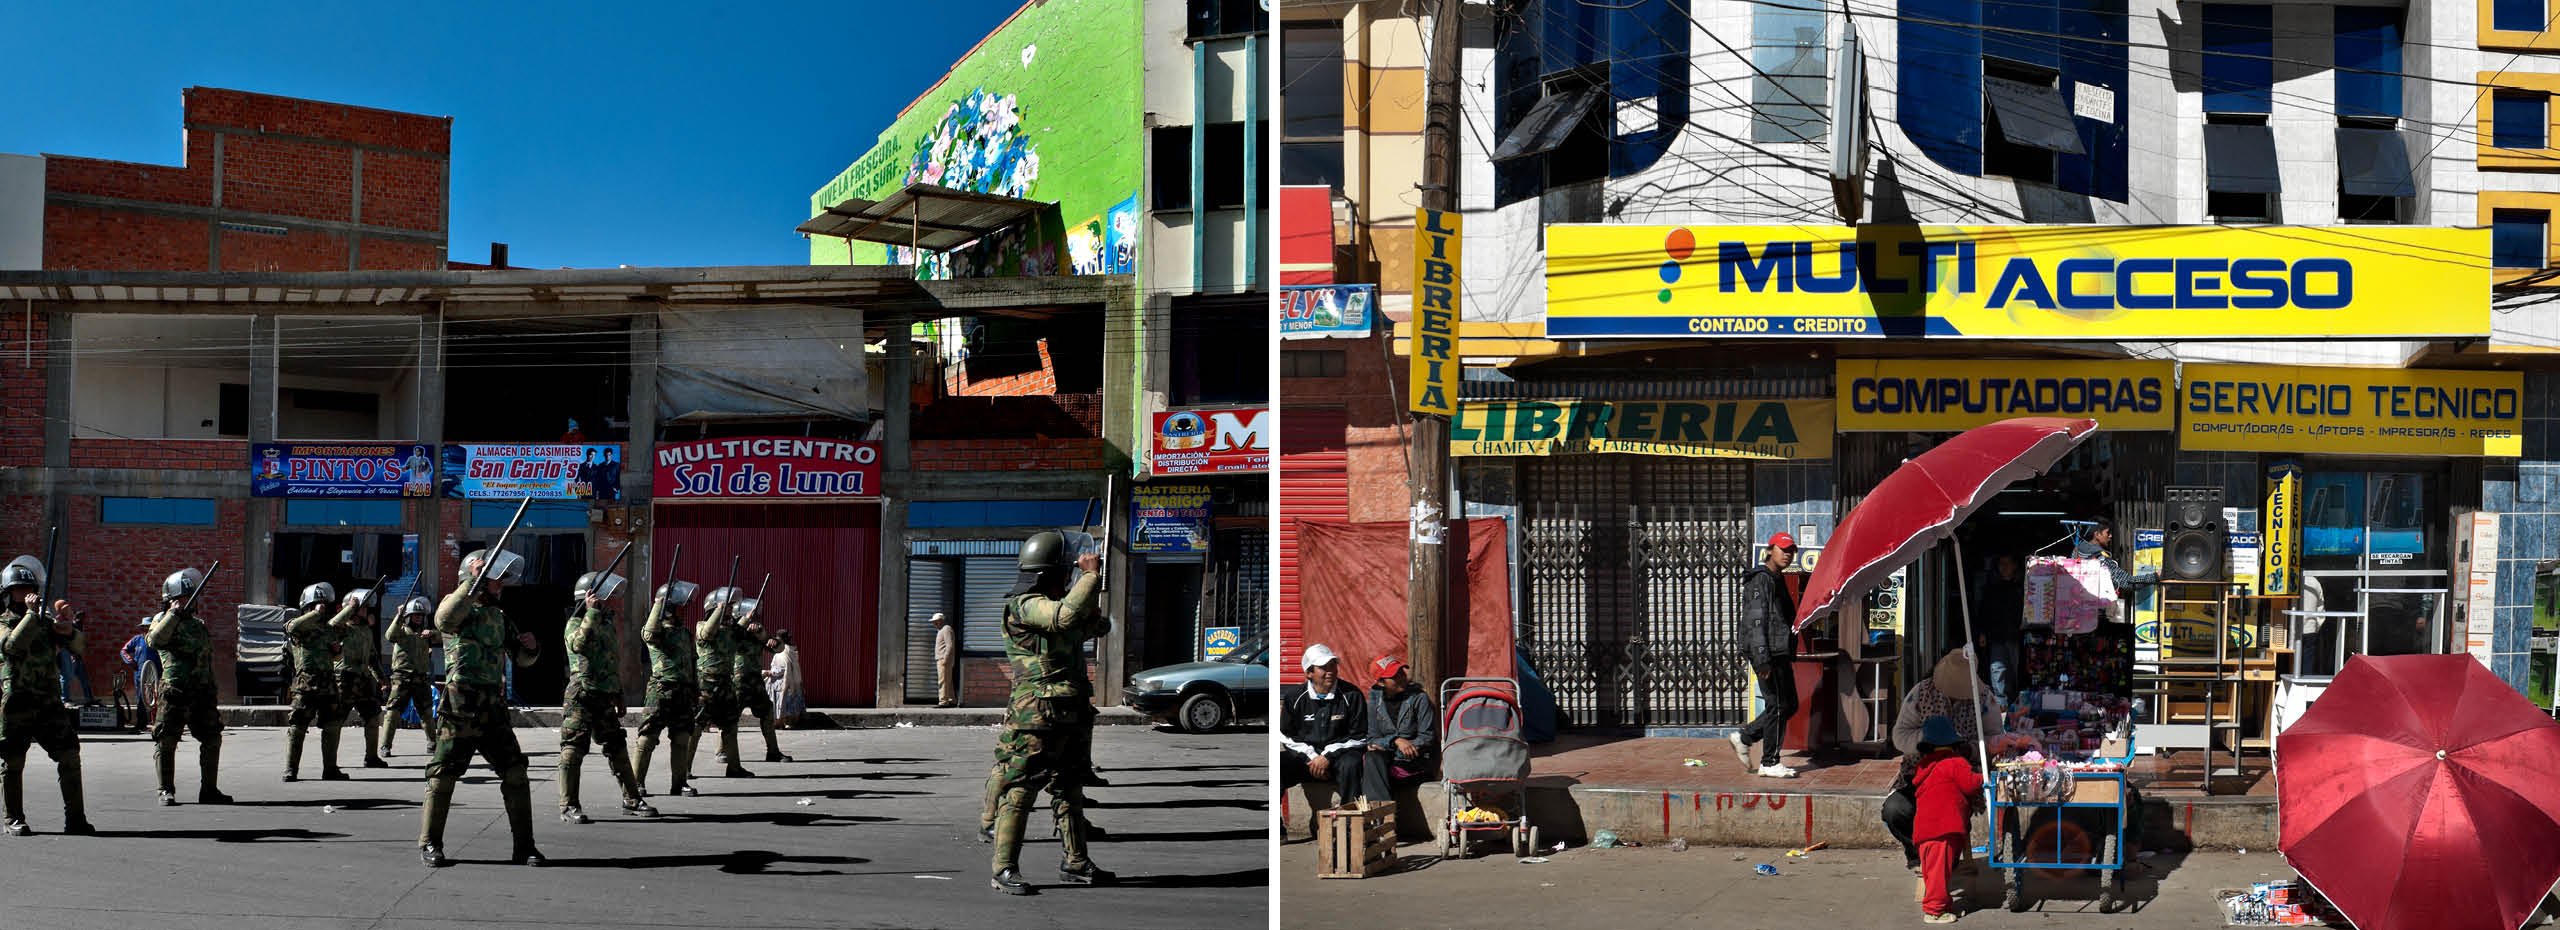 Colorful side by side photographs of soldiers and shops on a street of storefronts